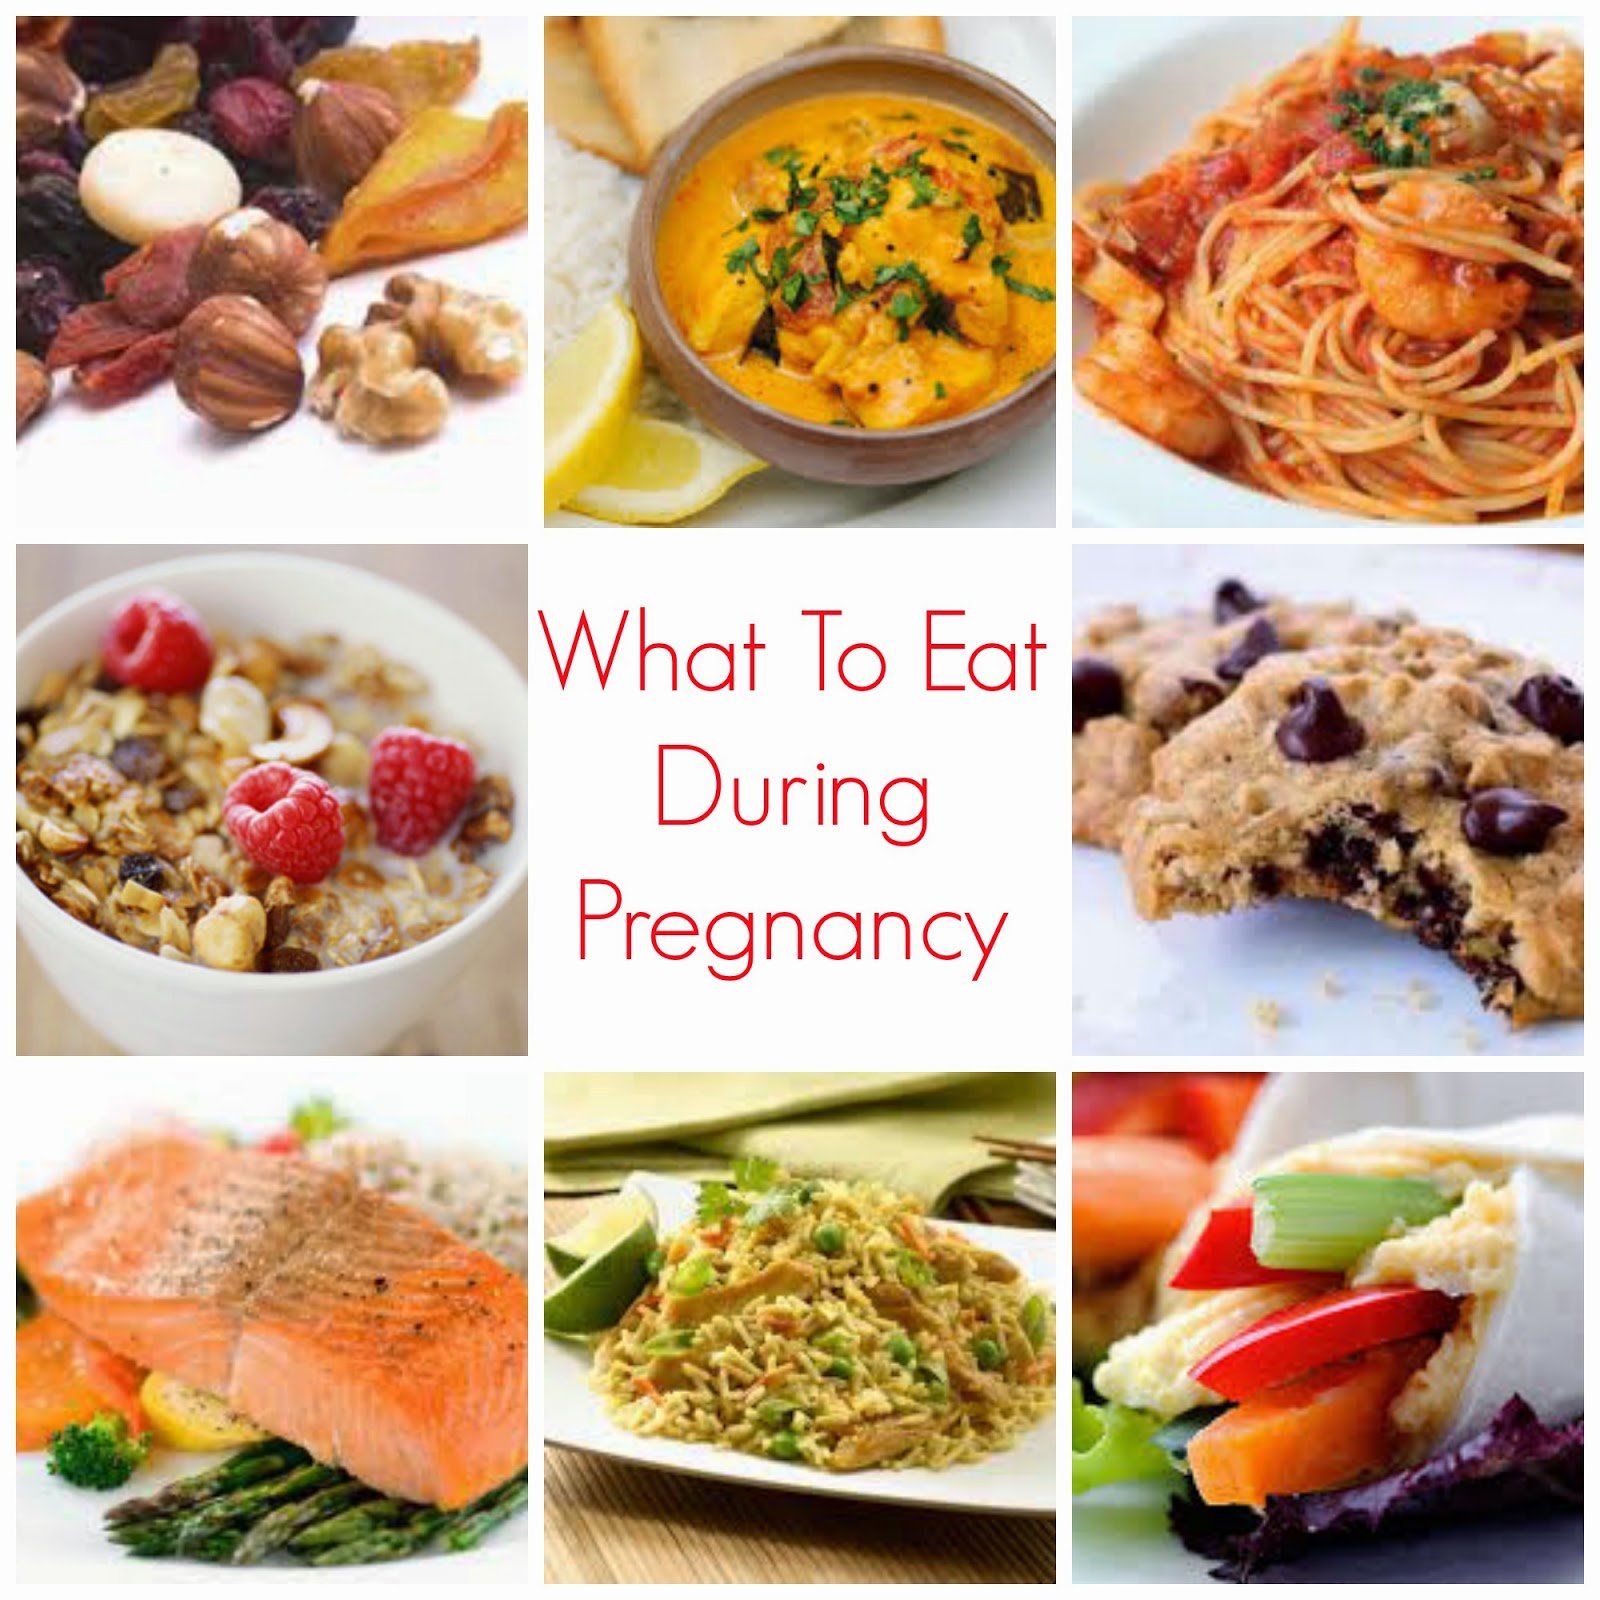 What To Eat During Pregnancy - The Chill Mom